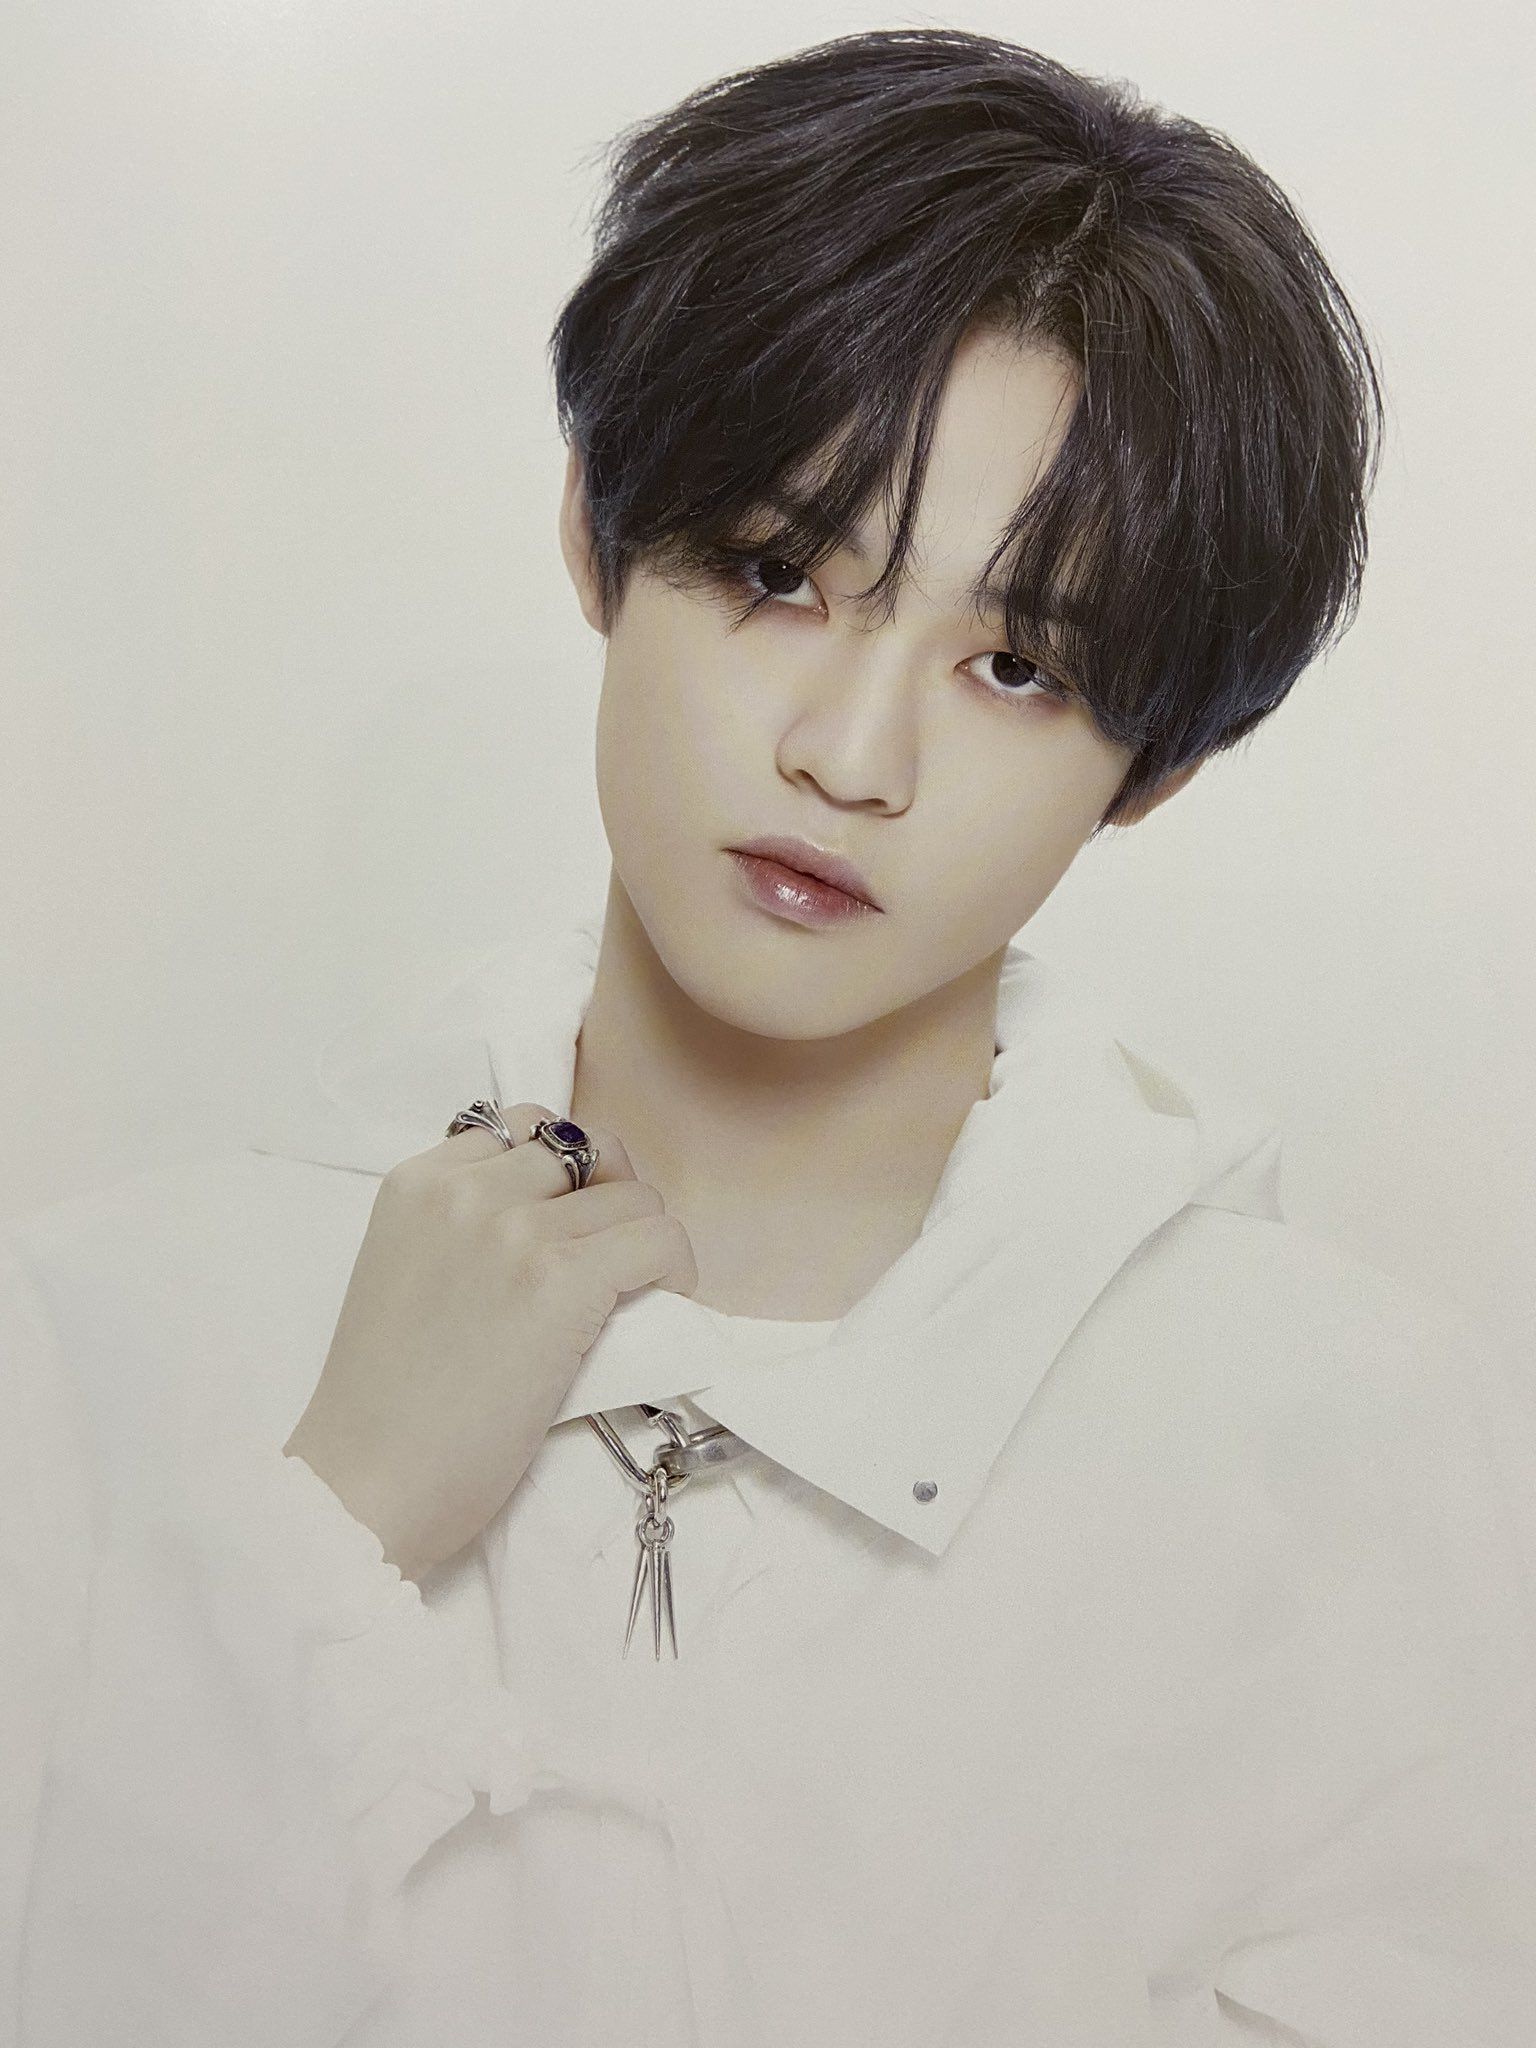 Detail Foto Chenle Nct Nomer 14